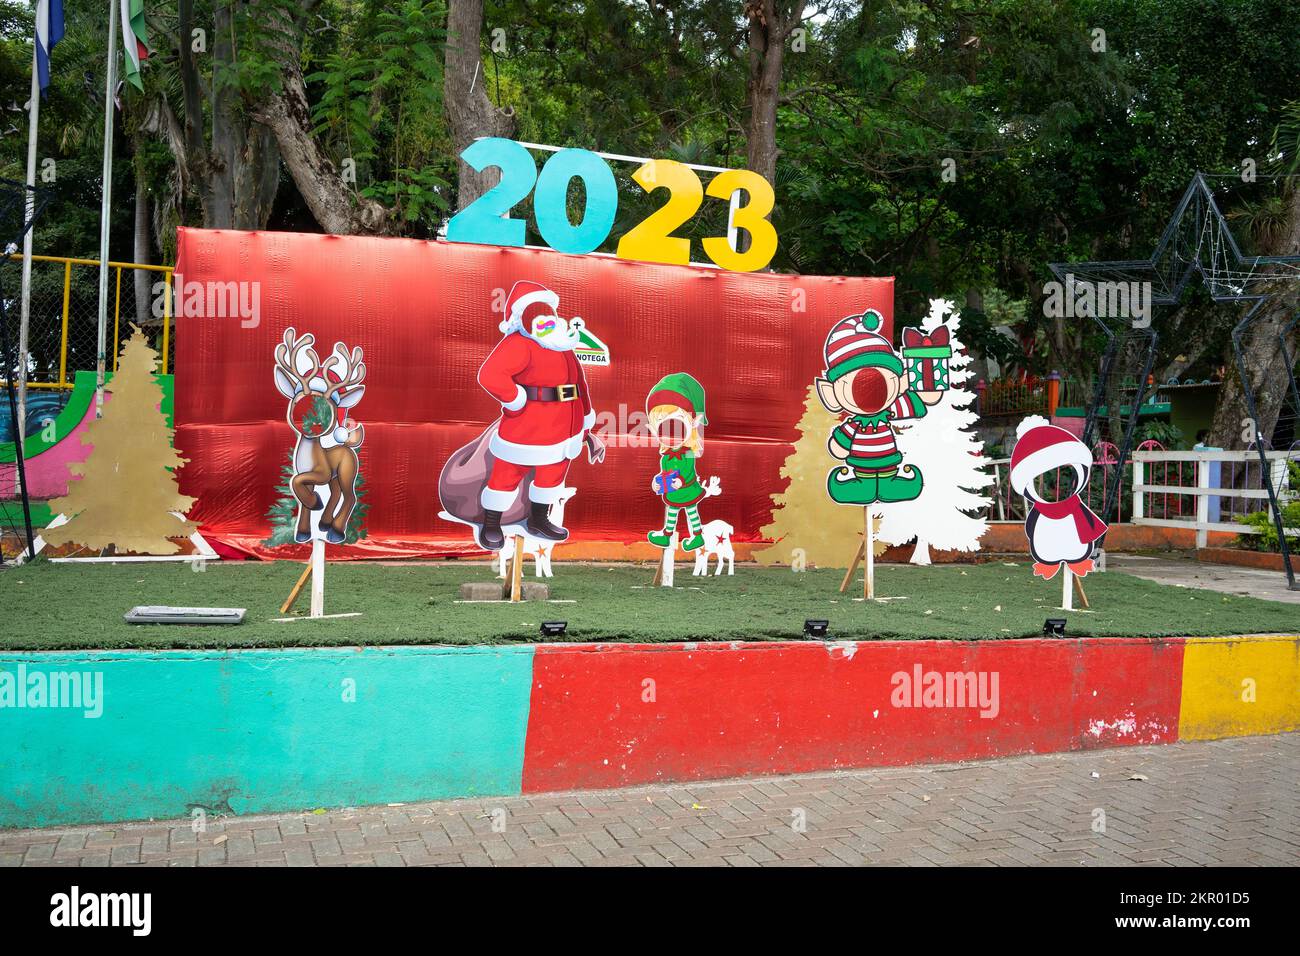 Display for photographs with holes for people's faces, Christmas in the Park, Jinotega, Nicaragua. Stock Photo